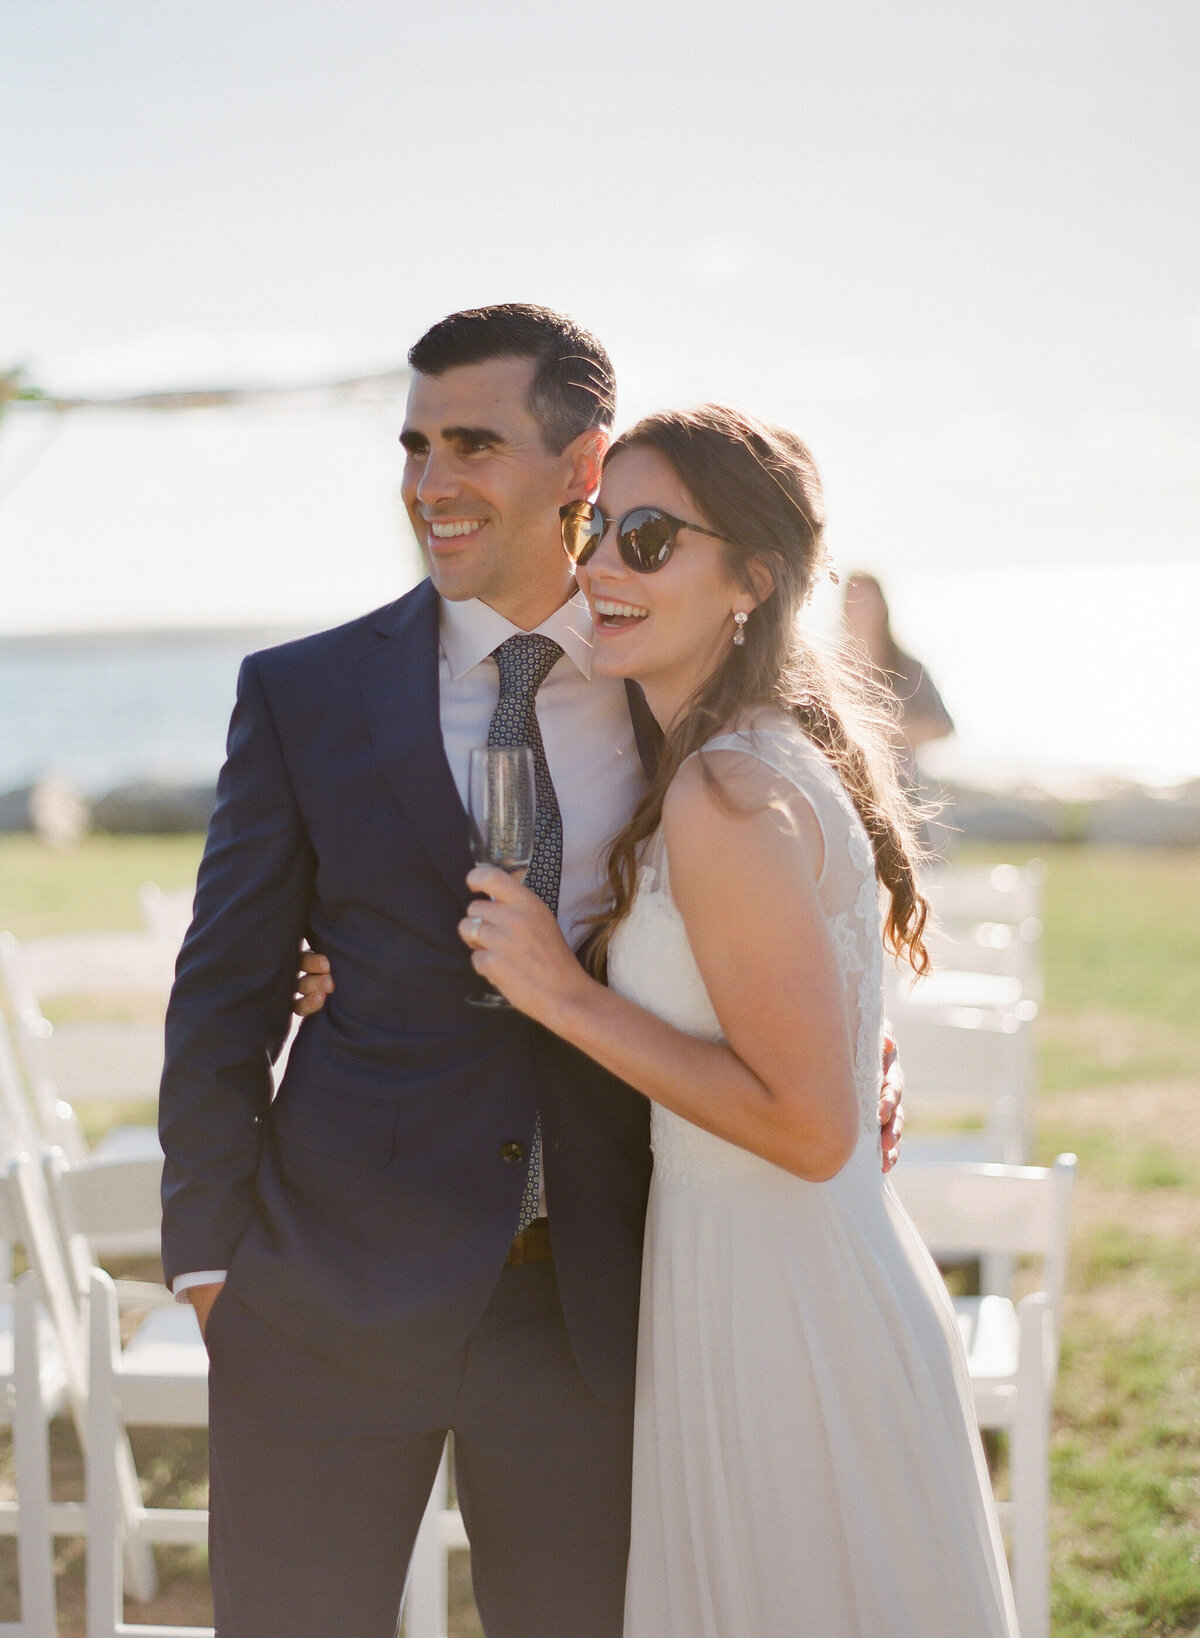 Jacqueline Anne Photography - Halifax Wedding Photographer - Jaclyn and Morgan-51